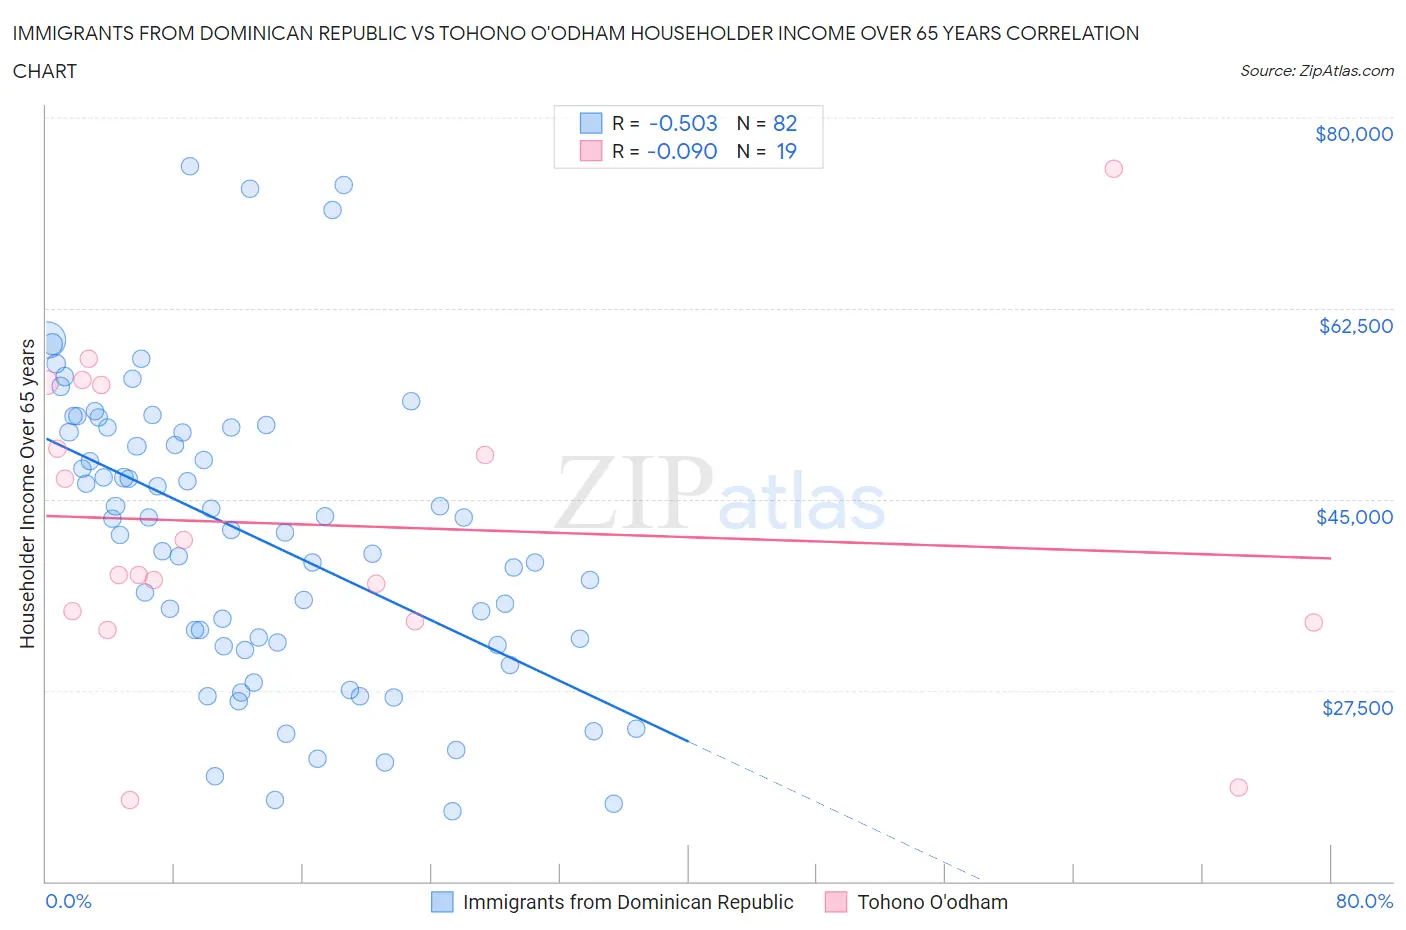 Immigrants from Dominican Republic vs Tohono O'odham Householder Income Over 65 years